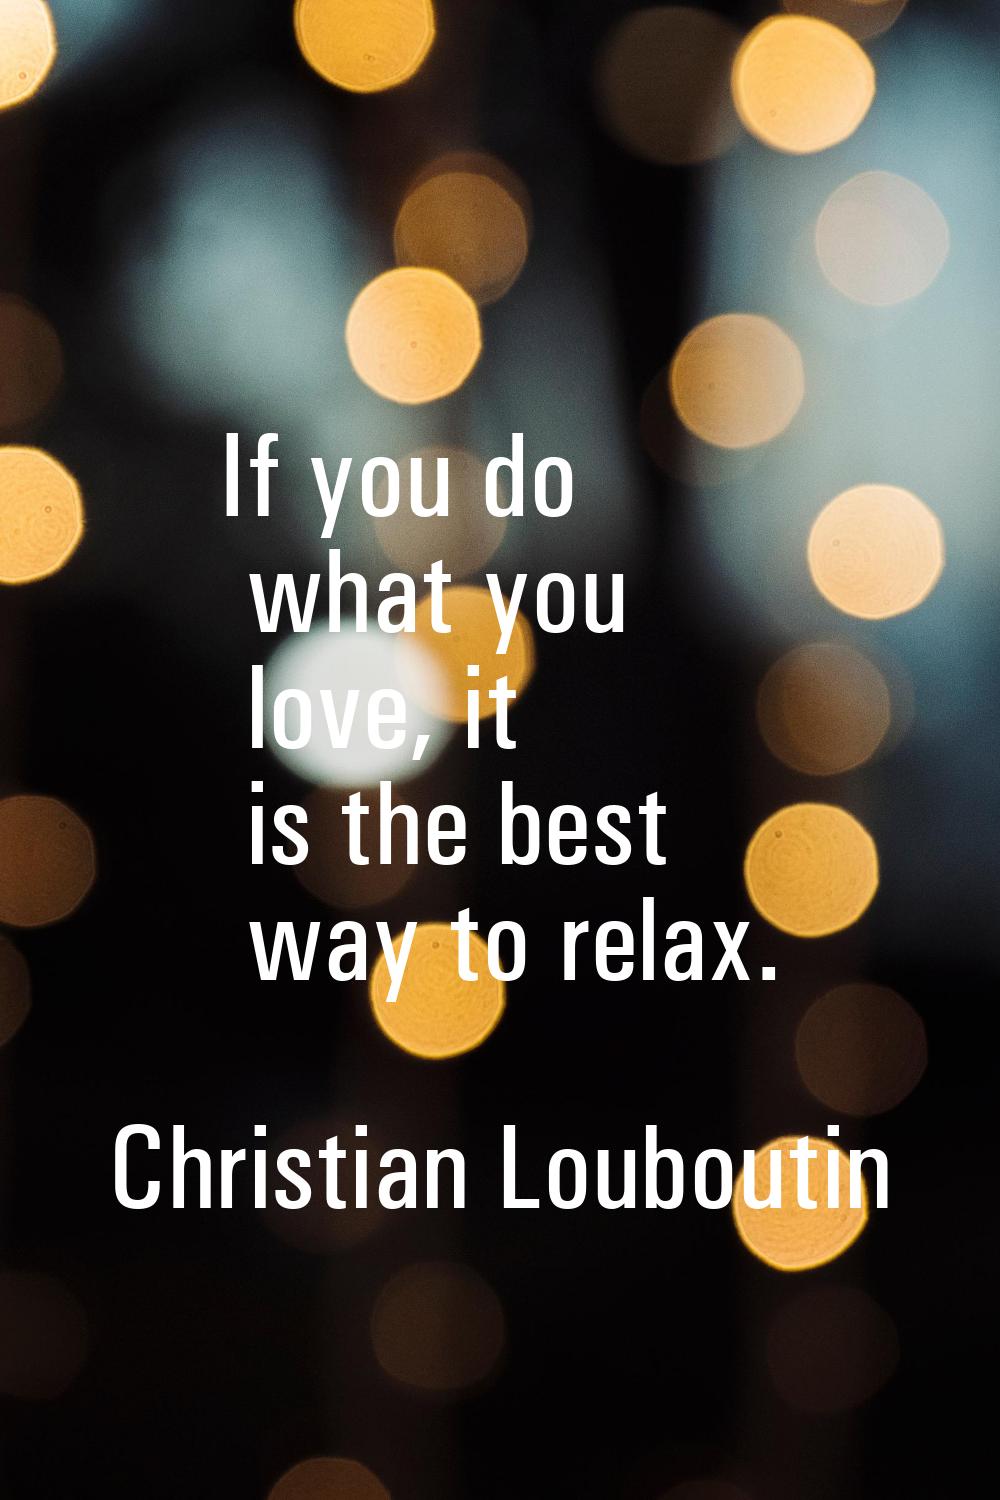 If you do what you love, it is the best way to relax.